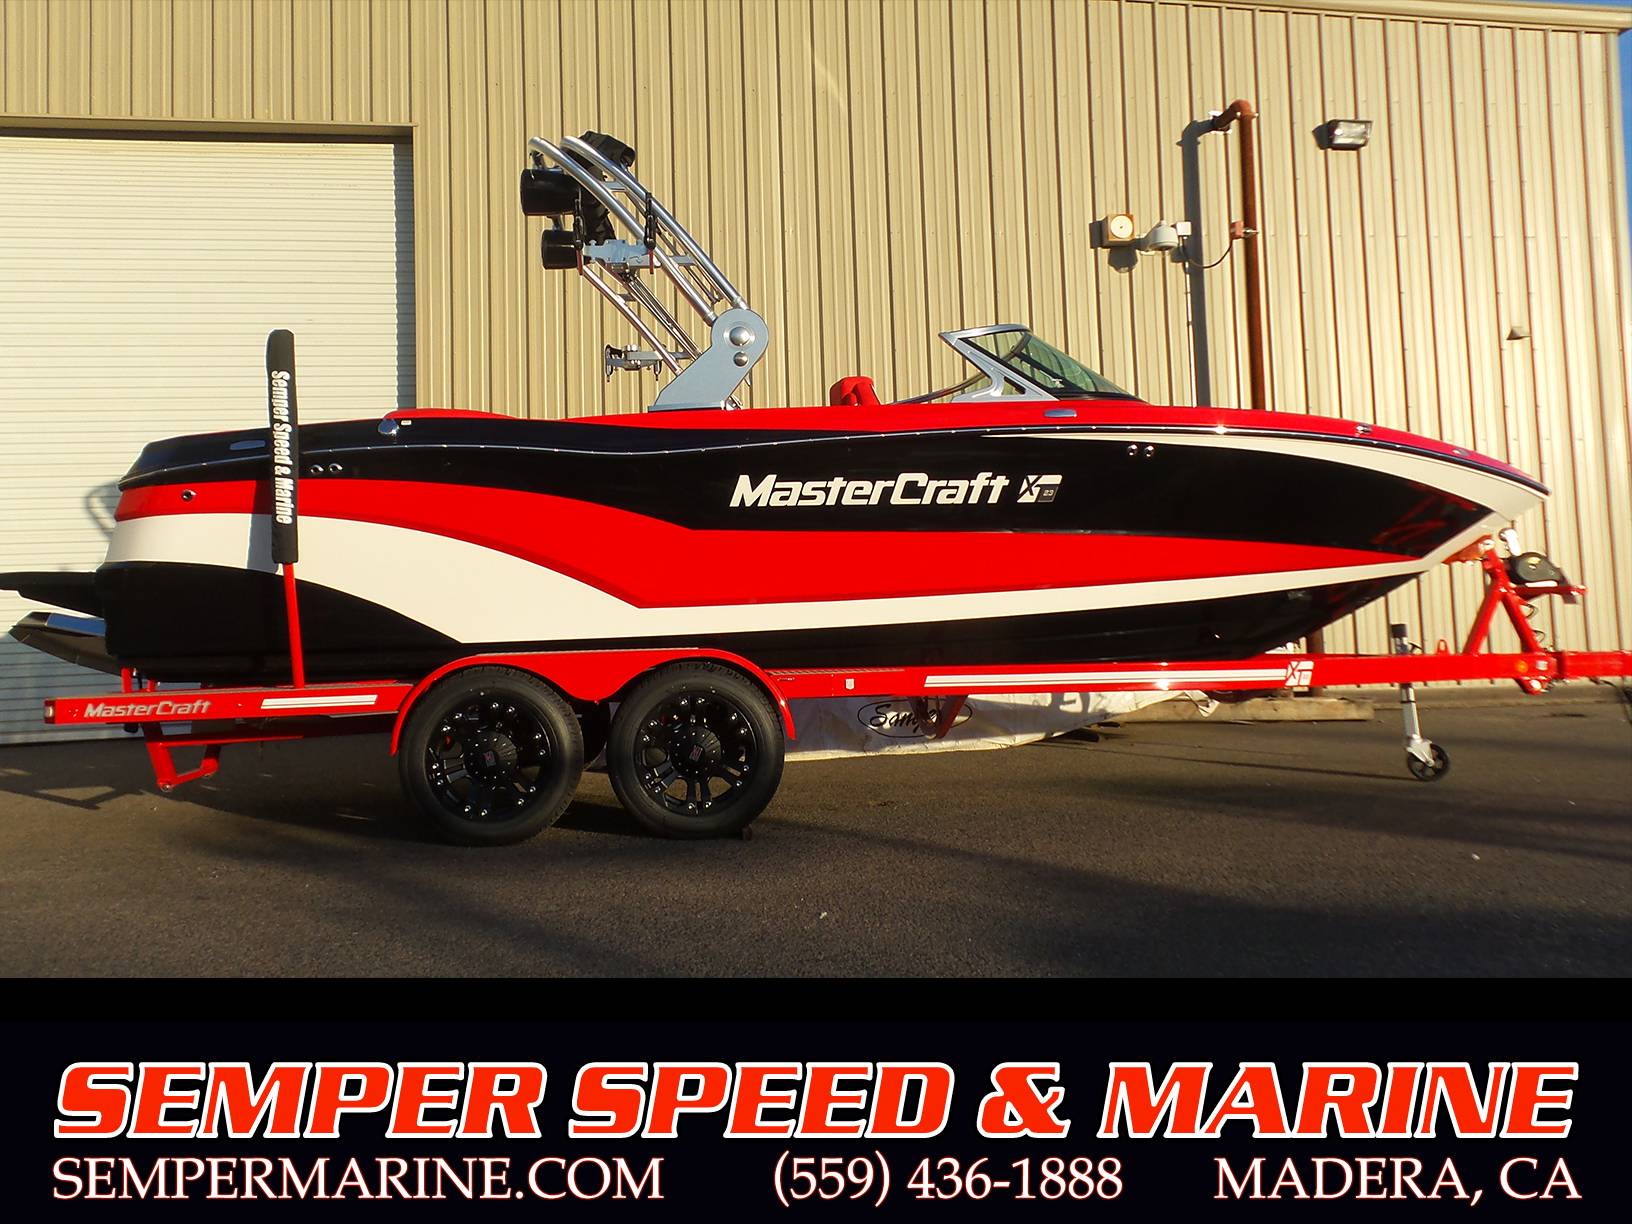 Red White Boat Logo - Mastercraft XT23 RED BLACK WHITE Power Boats Inboard Madera